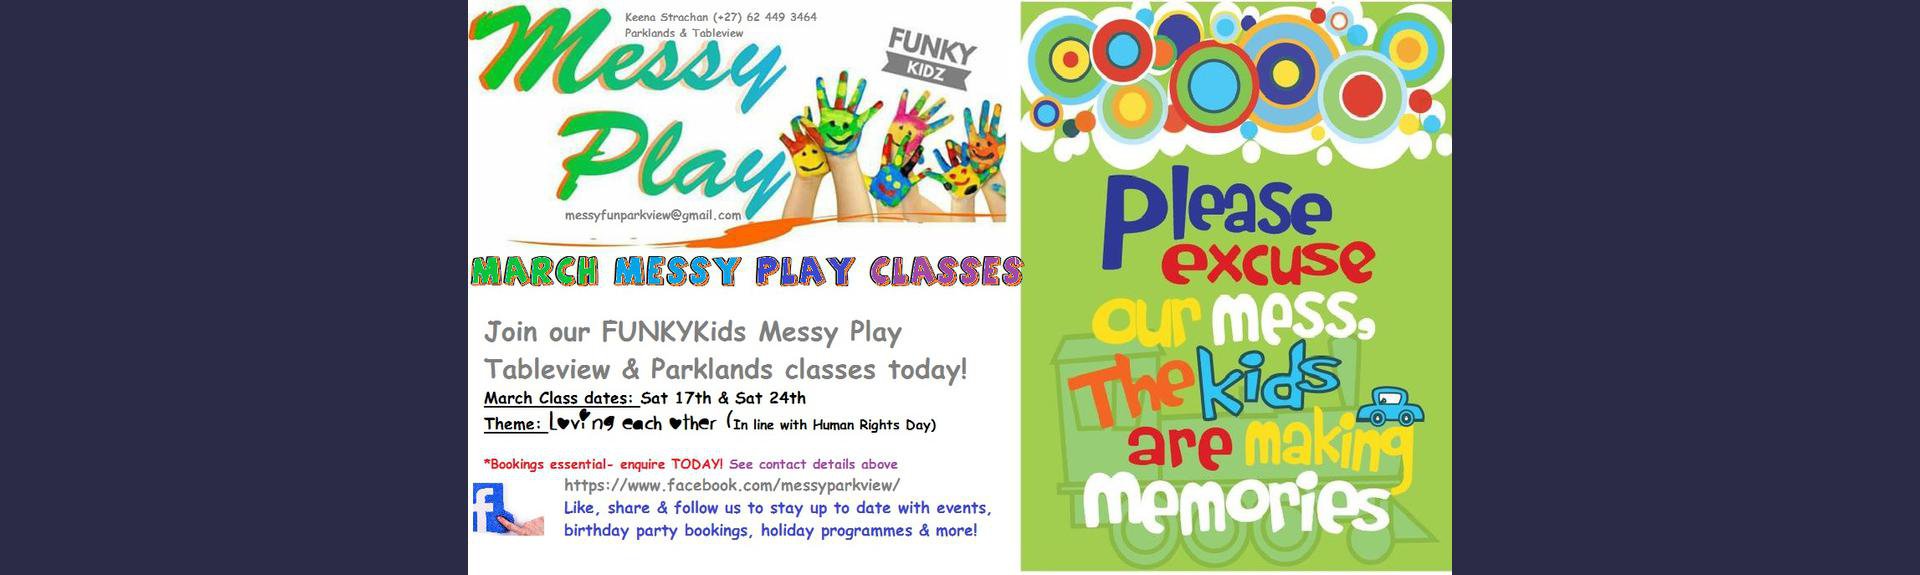 Parklands & Tableview Messy Play March class 2